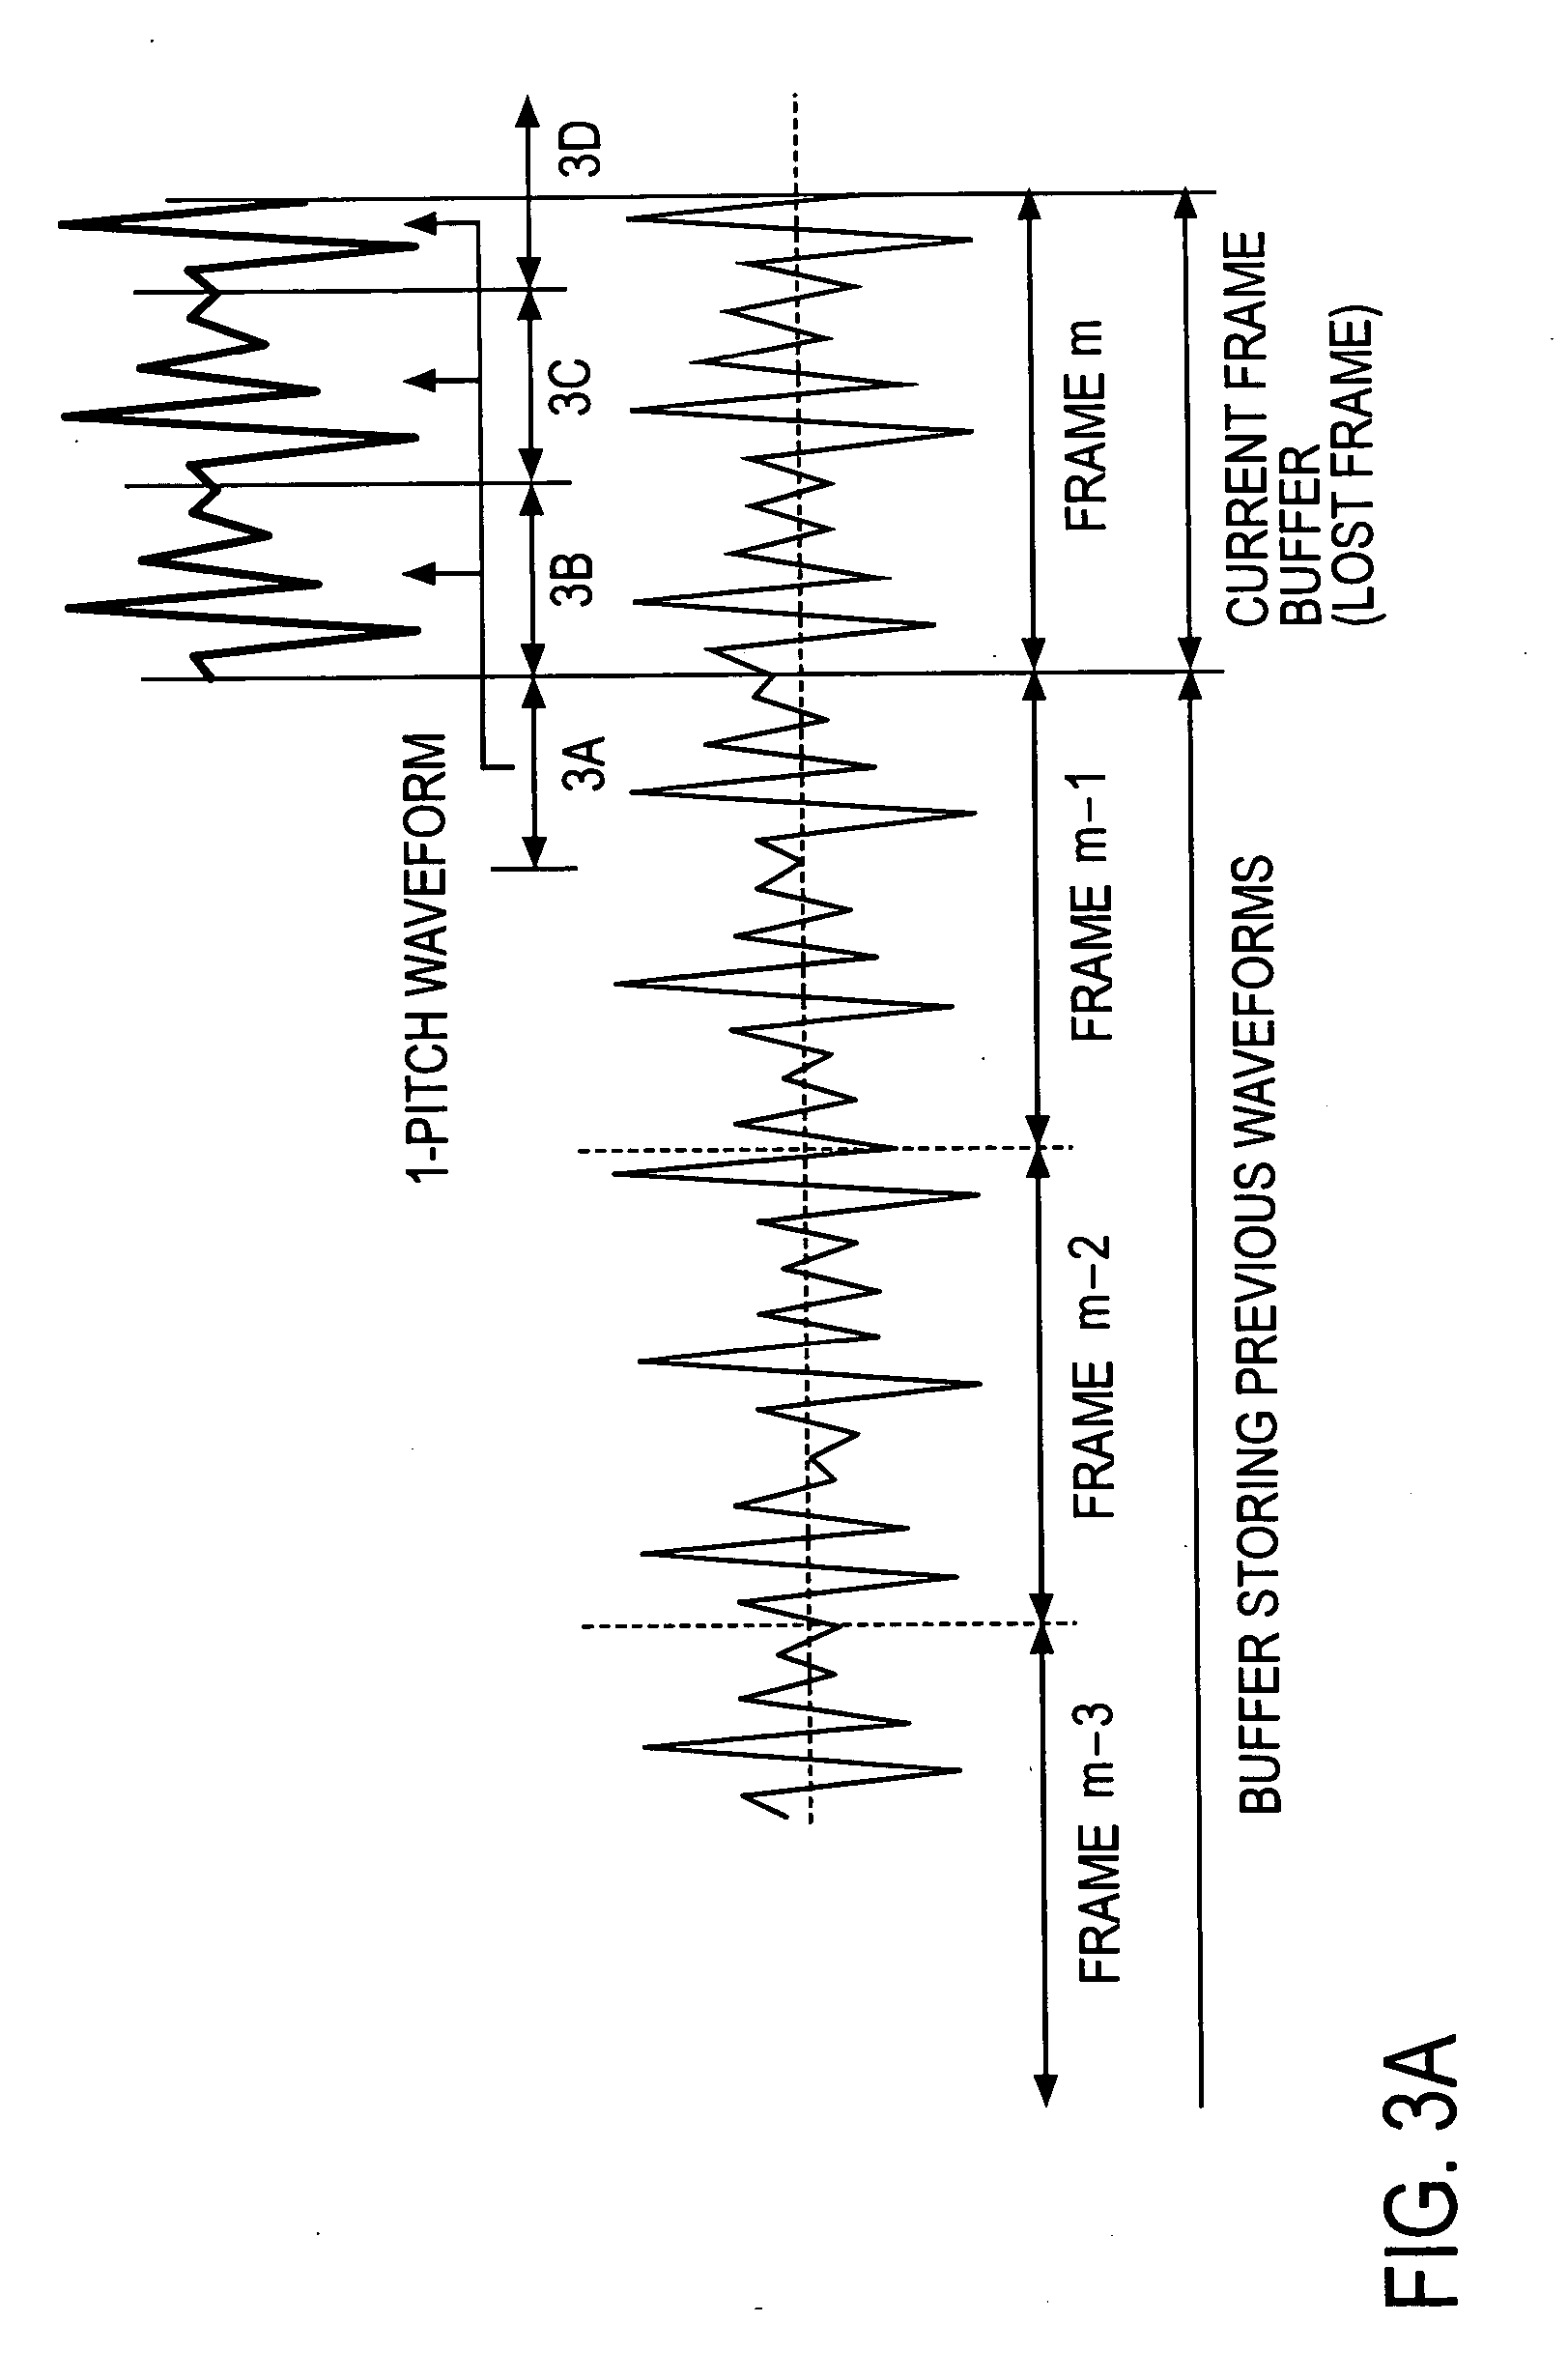 Sound packet transmitting method, sound packet transmitting apparatus, sound packet transmitting program, and recording medium in which that program has been recorded